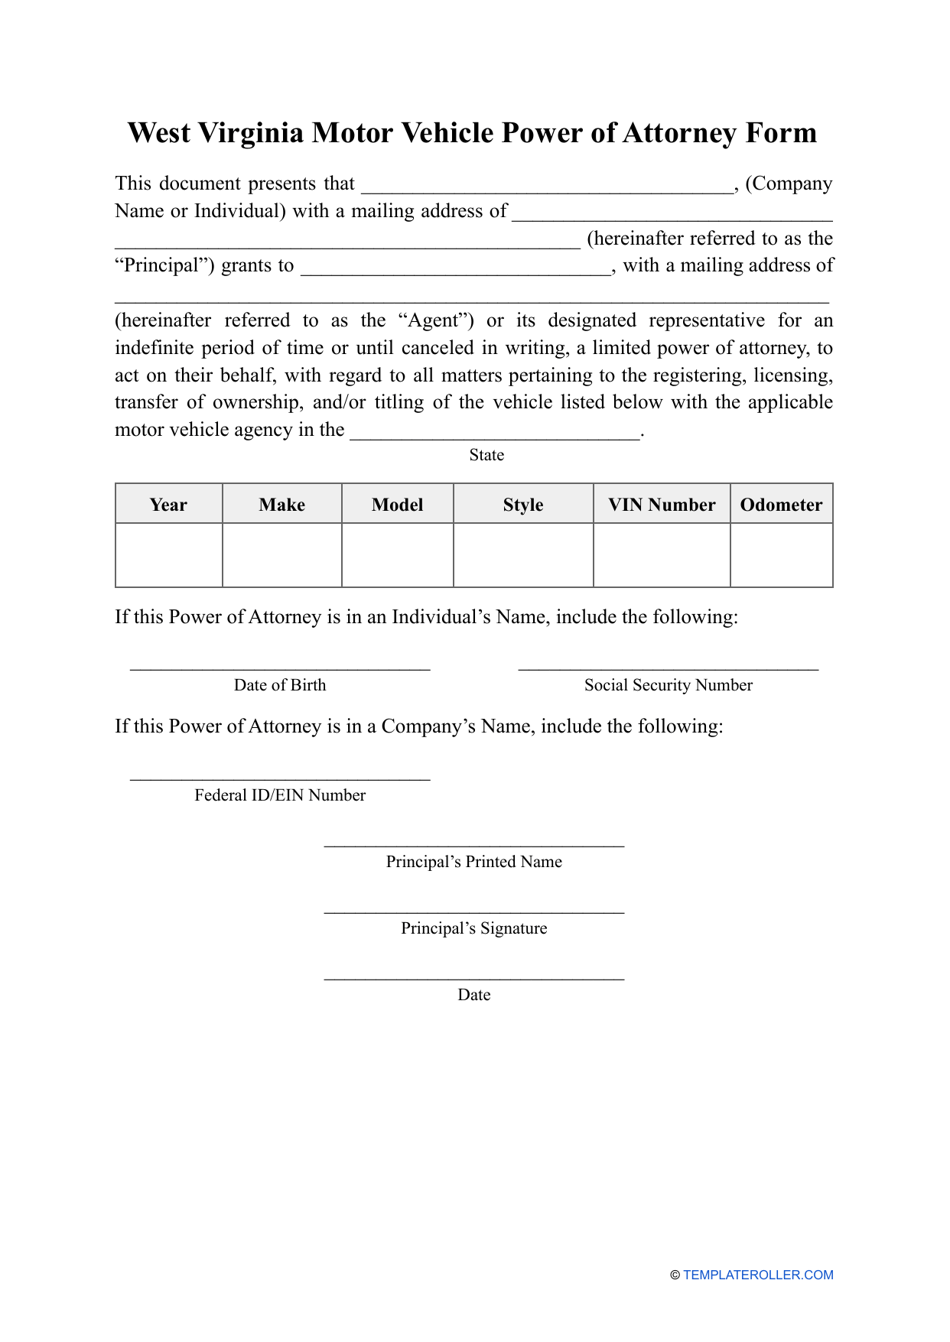 Motor Vehicle Power of Attorney Form - West Virginia, Page 1